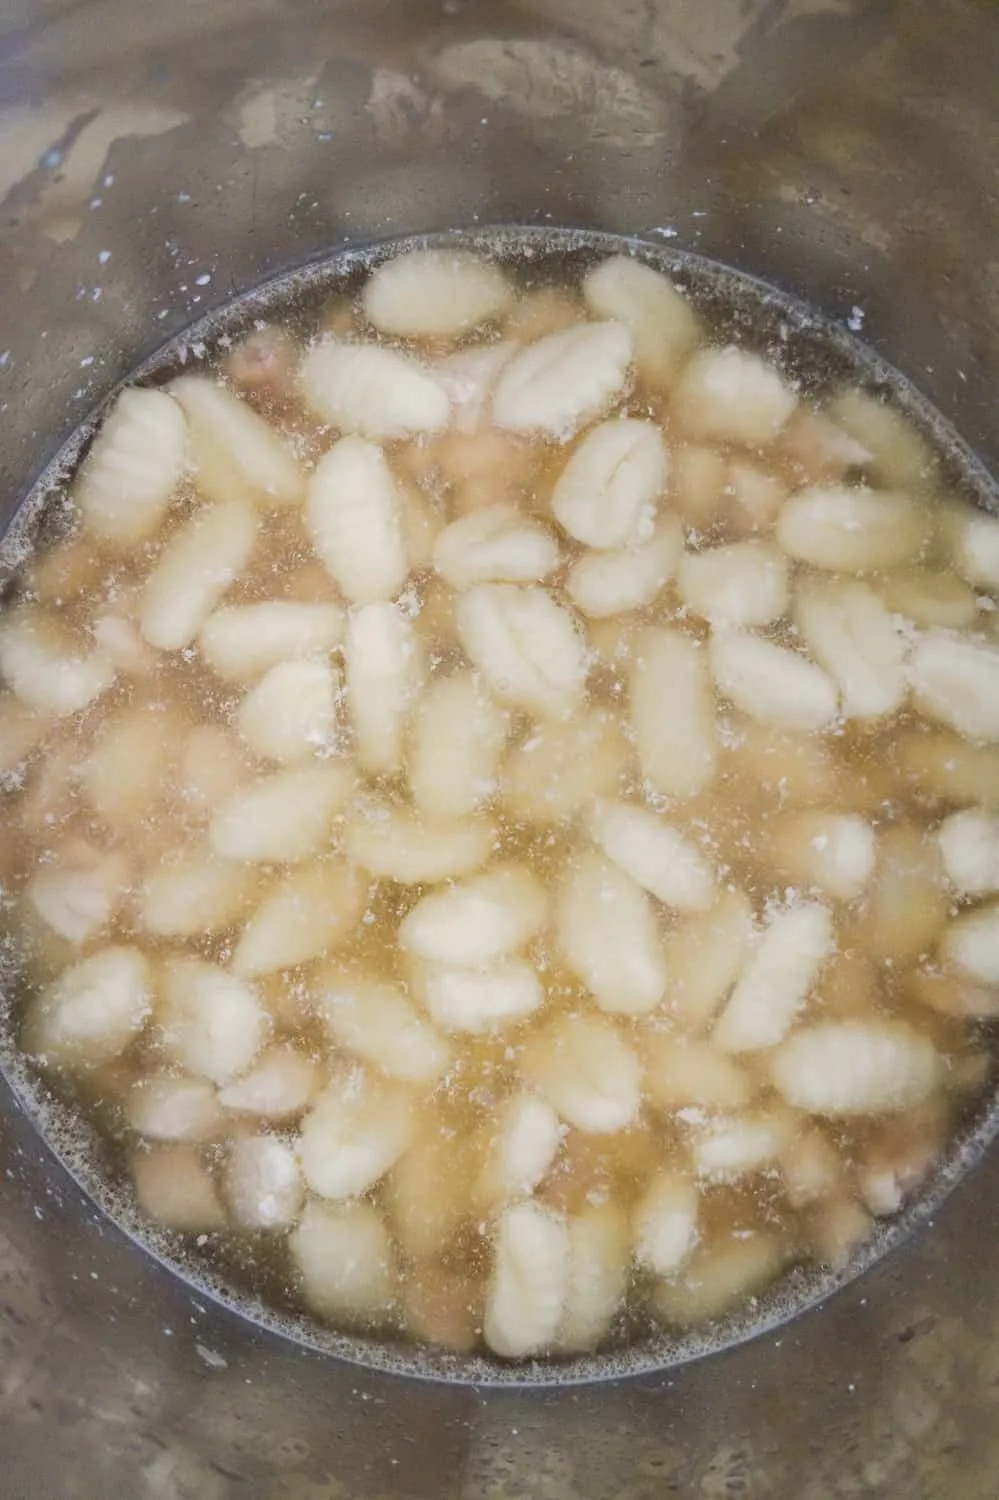 uncooked potato gnocchi in chicken broth in an Instant Pot